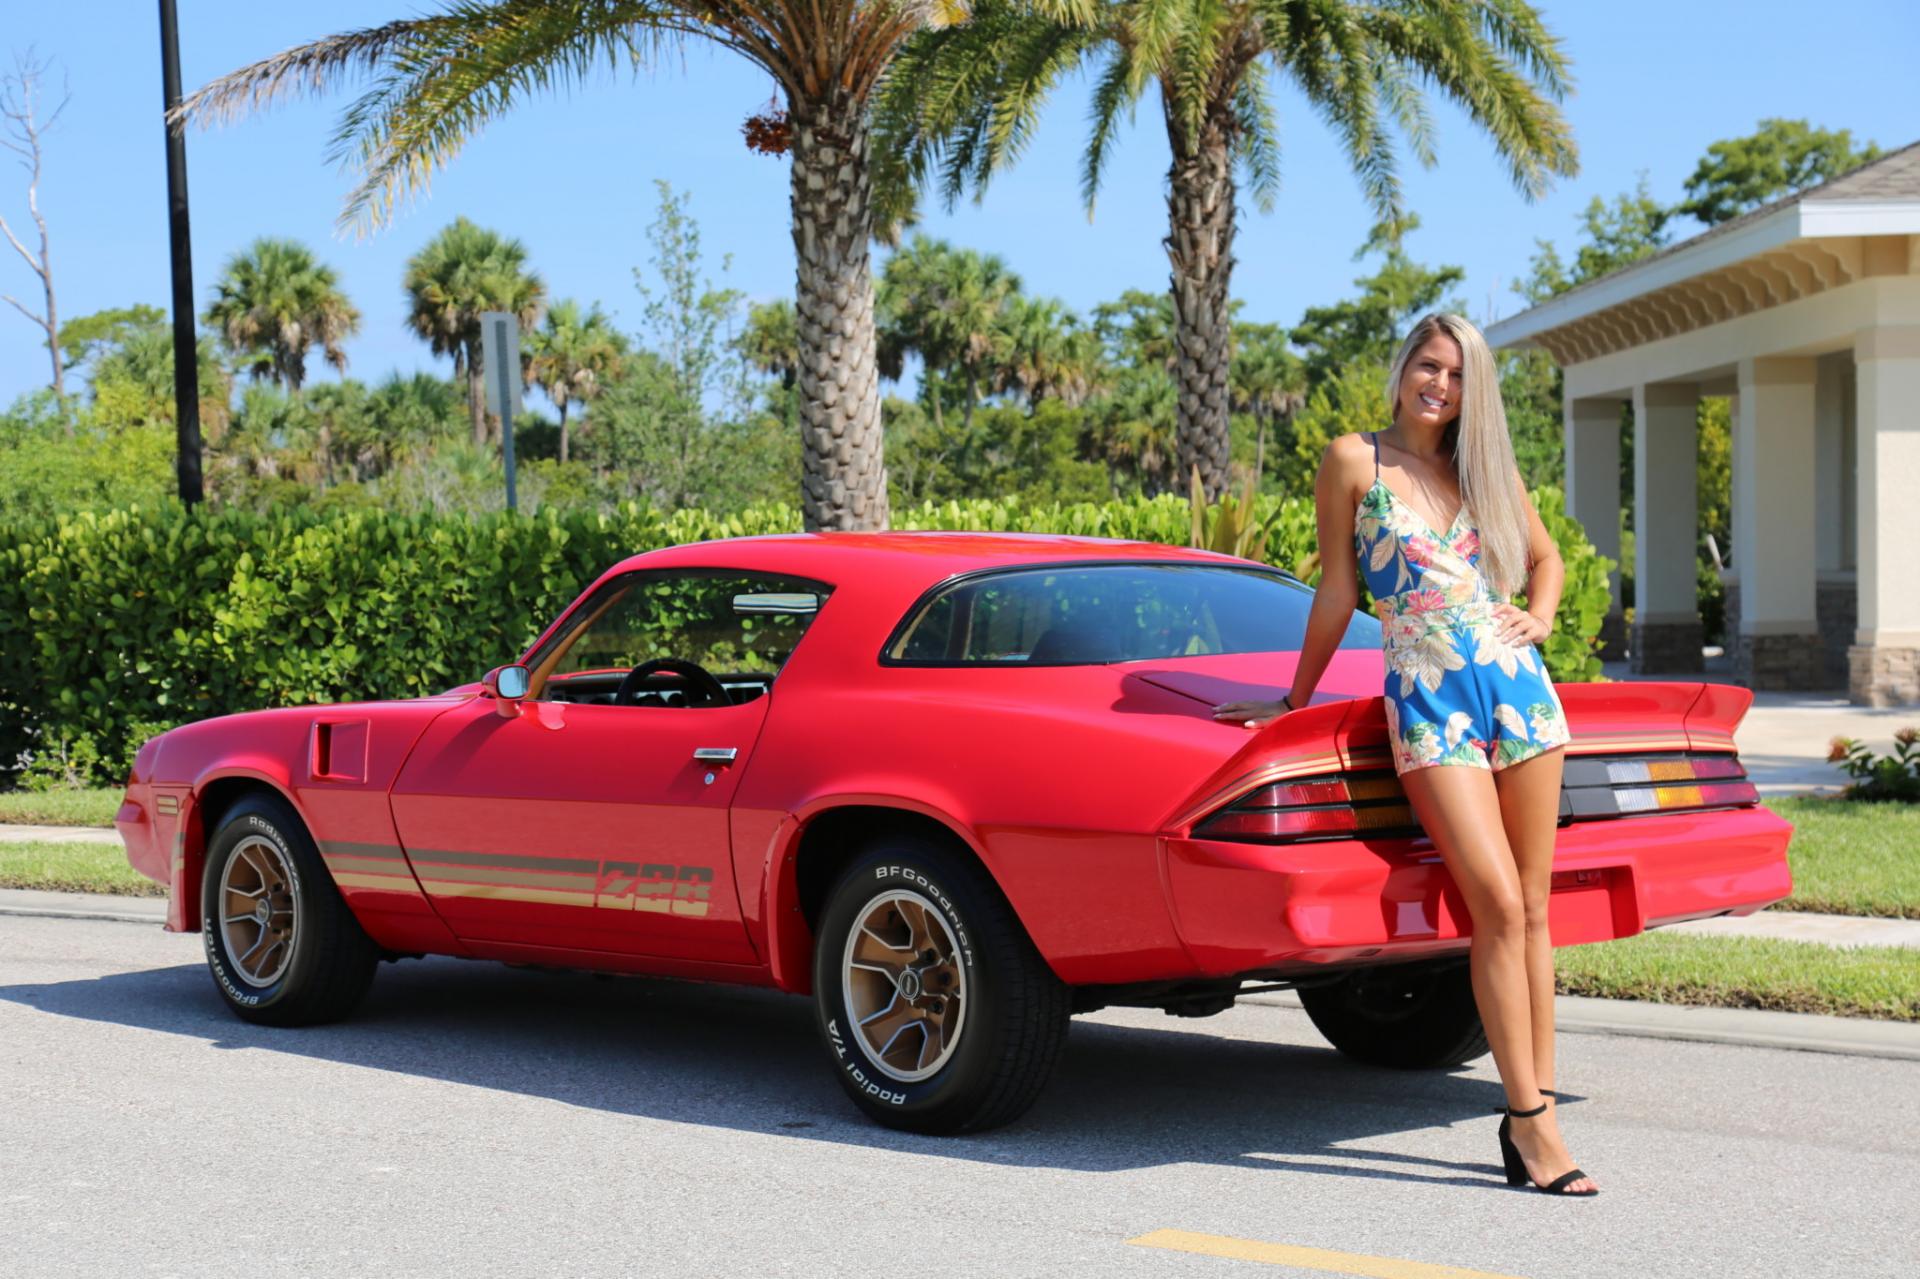 Used 1980 Chevrolet Camaro Z/28 for sale Sold at Muscle Cars for Sale Inc. in Fort Myers FL 33912 5